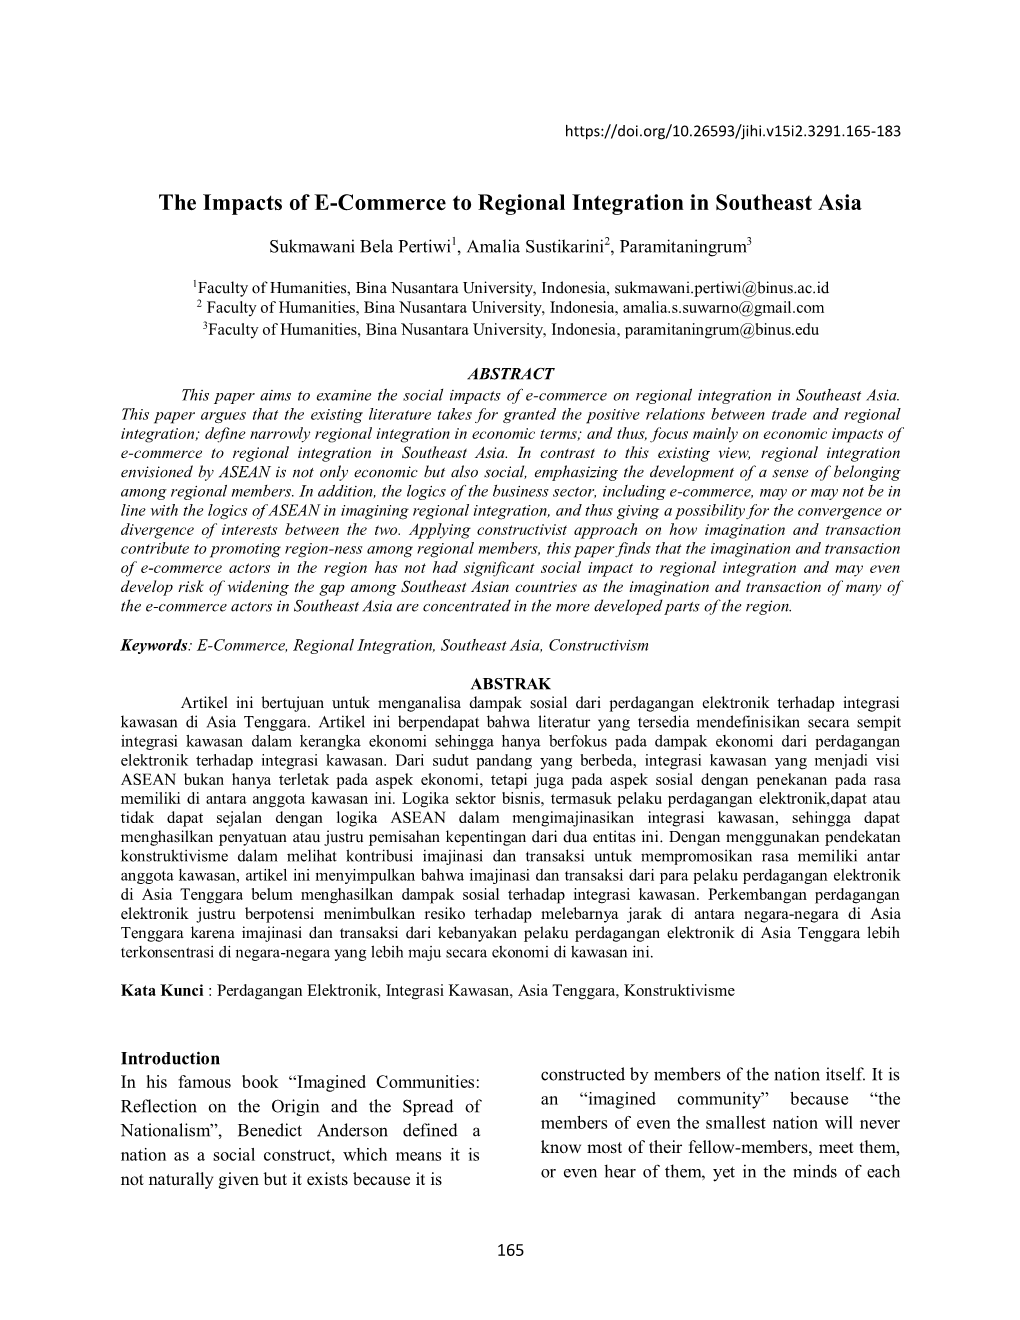 The Impacts of E-Commerce to Regional Integration in Southeast Asia